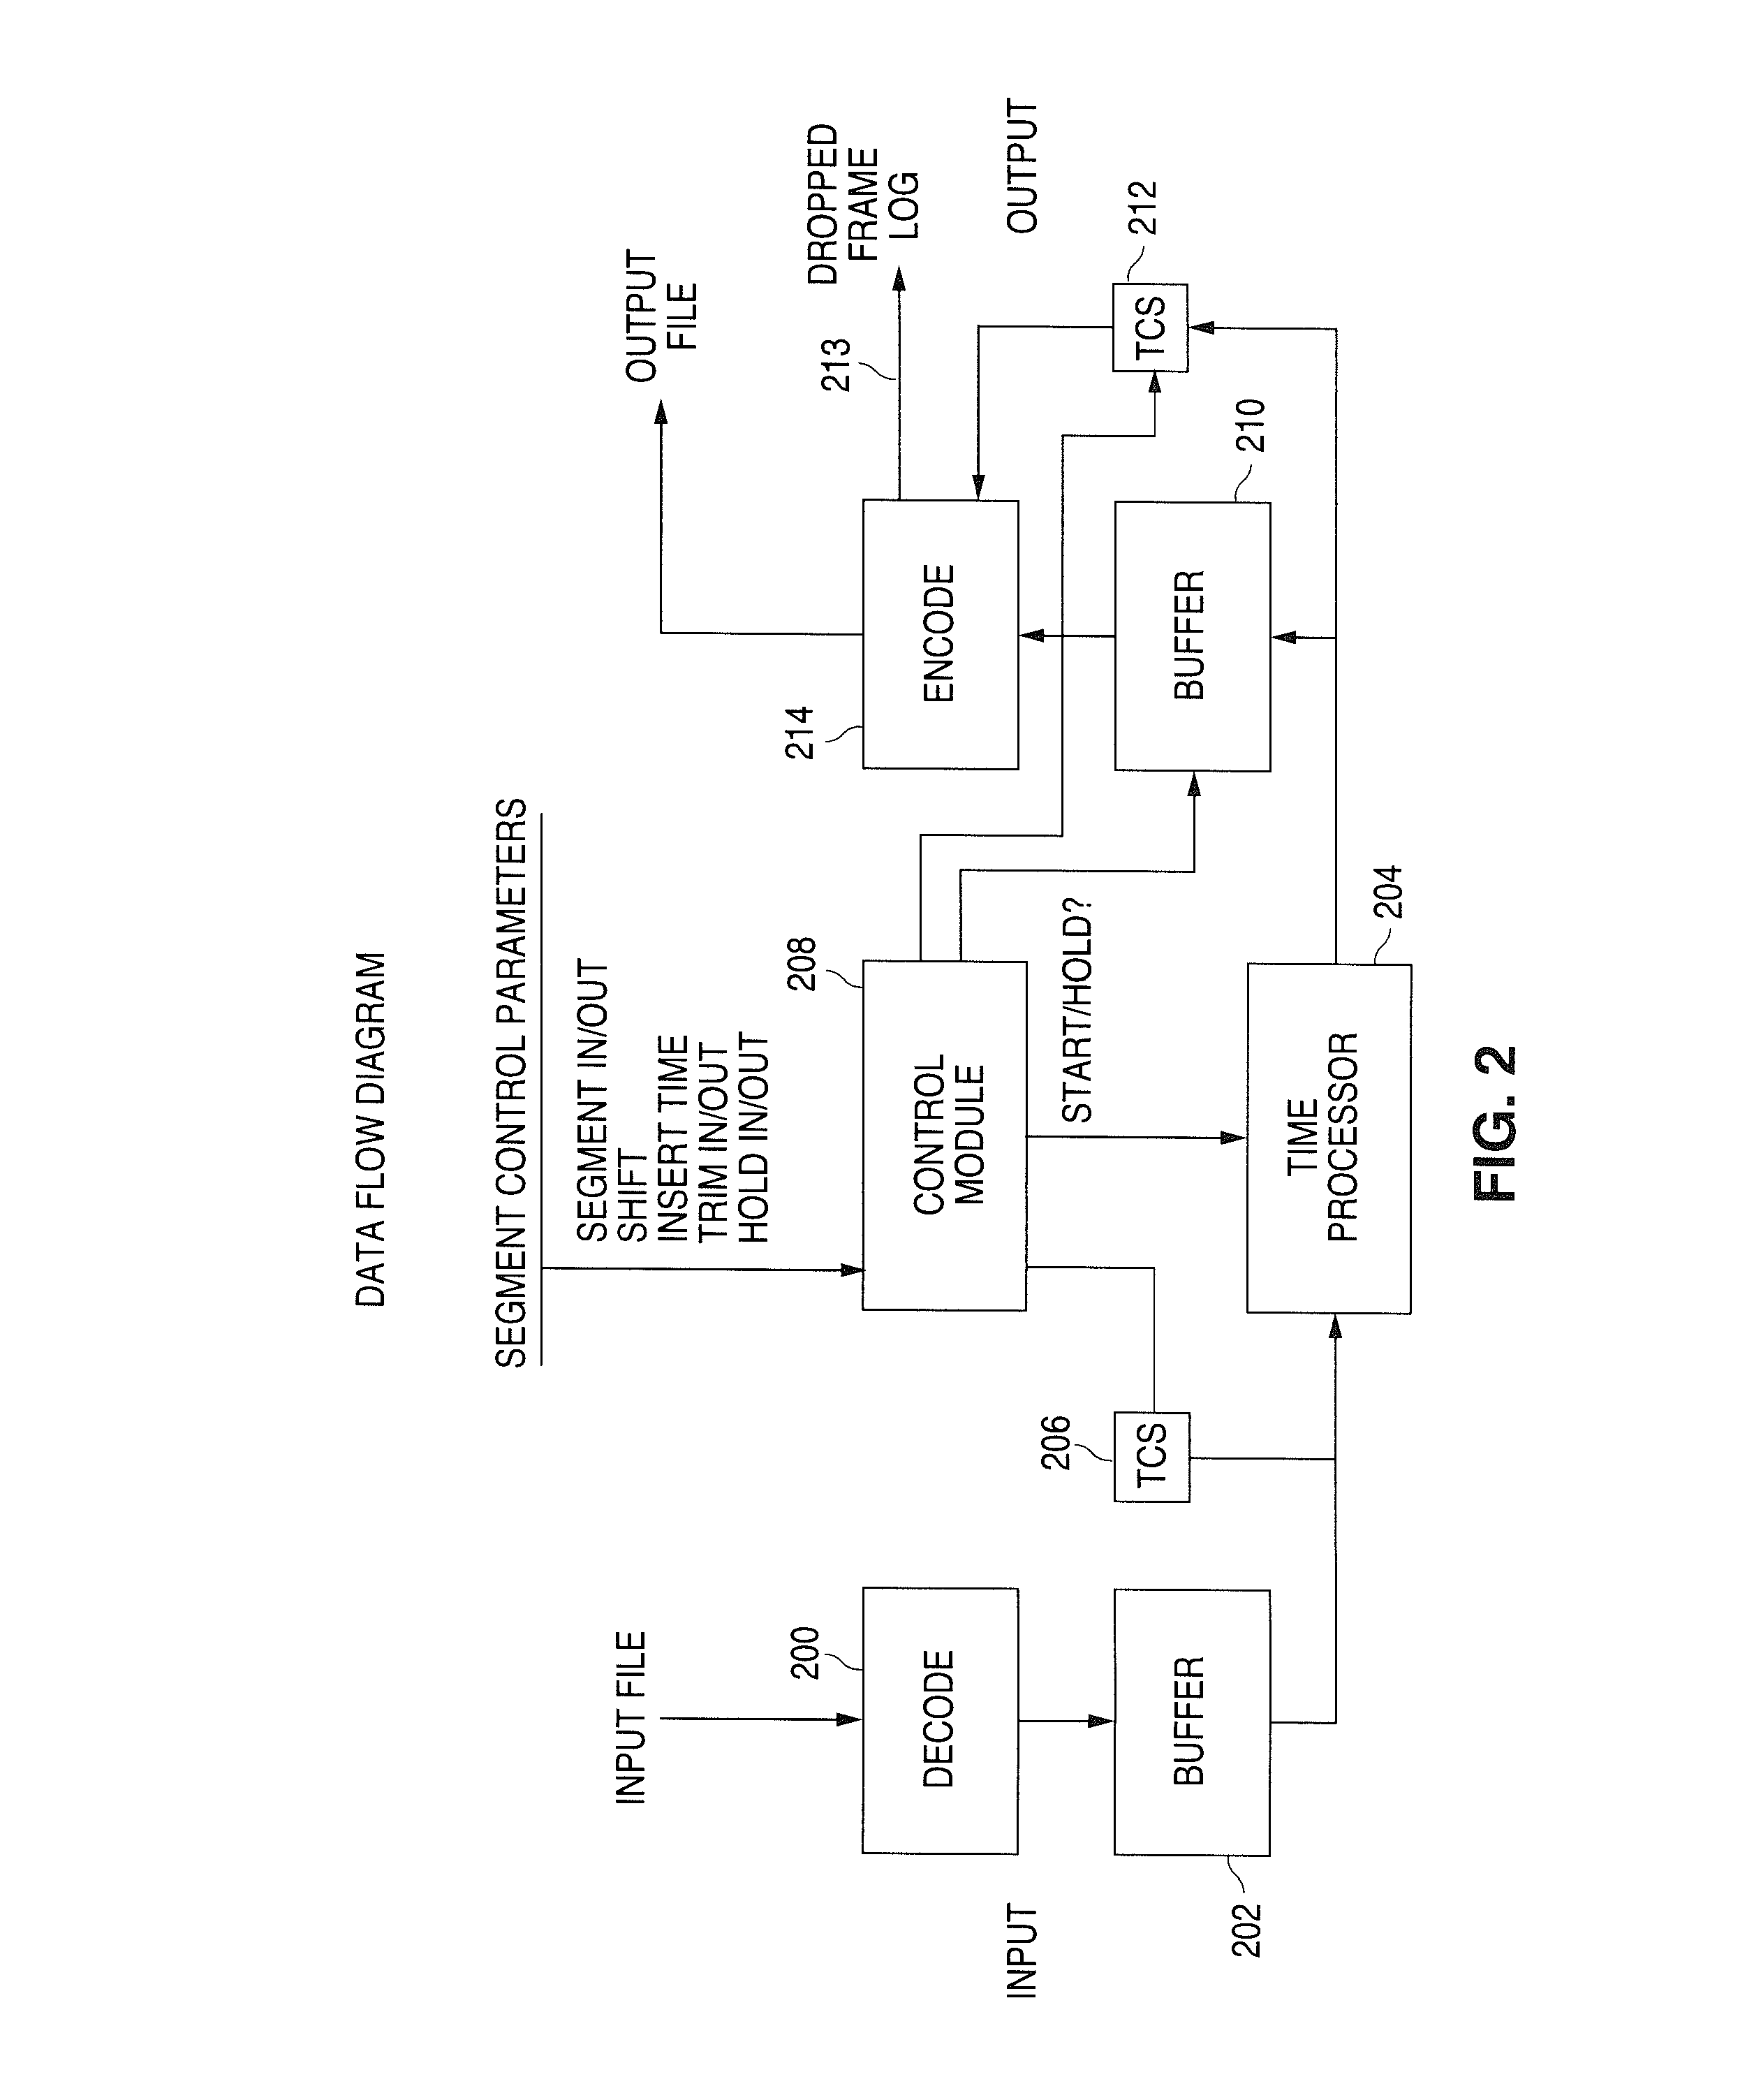 Methods and systems for control, management and editing of digital audio/video segment duration with remapped time code